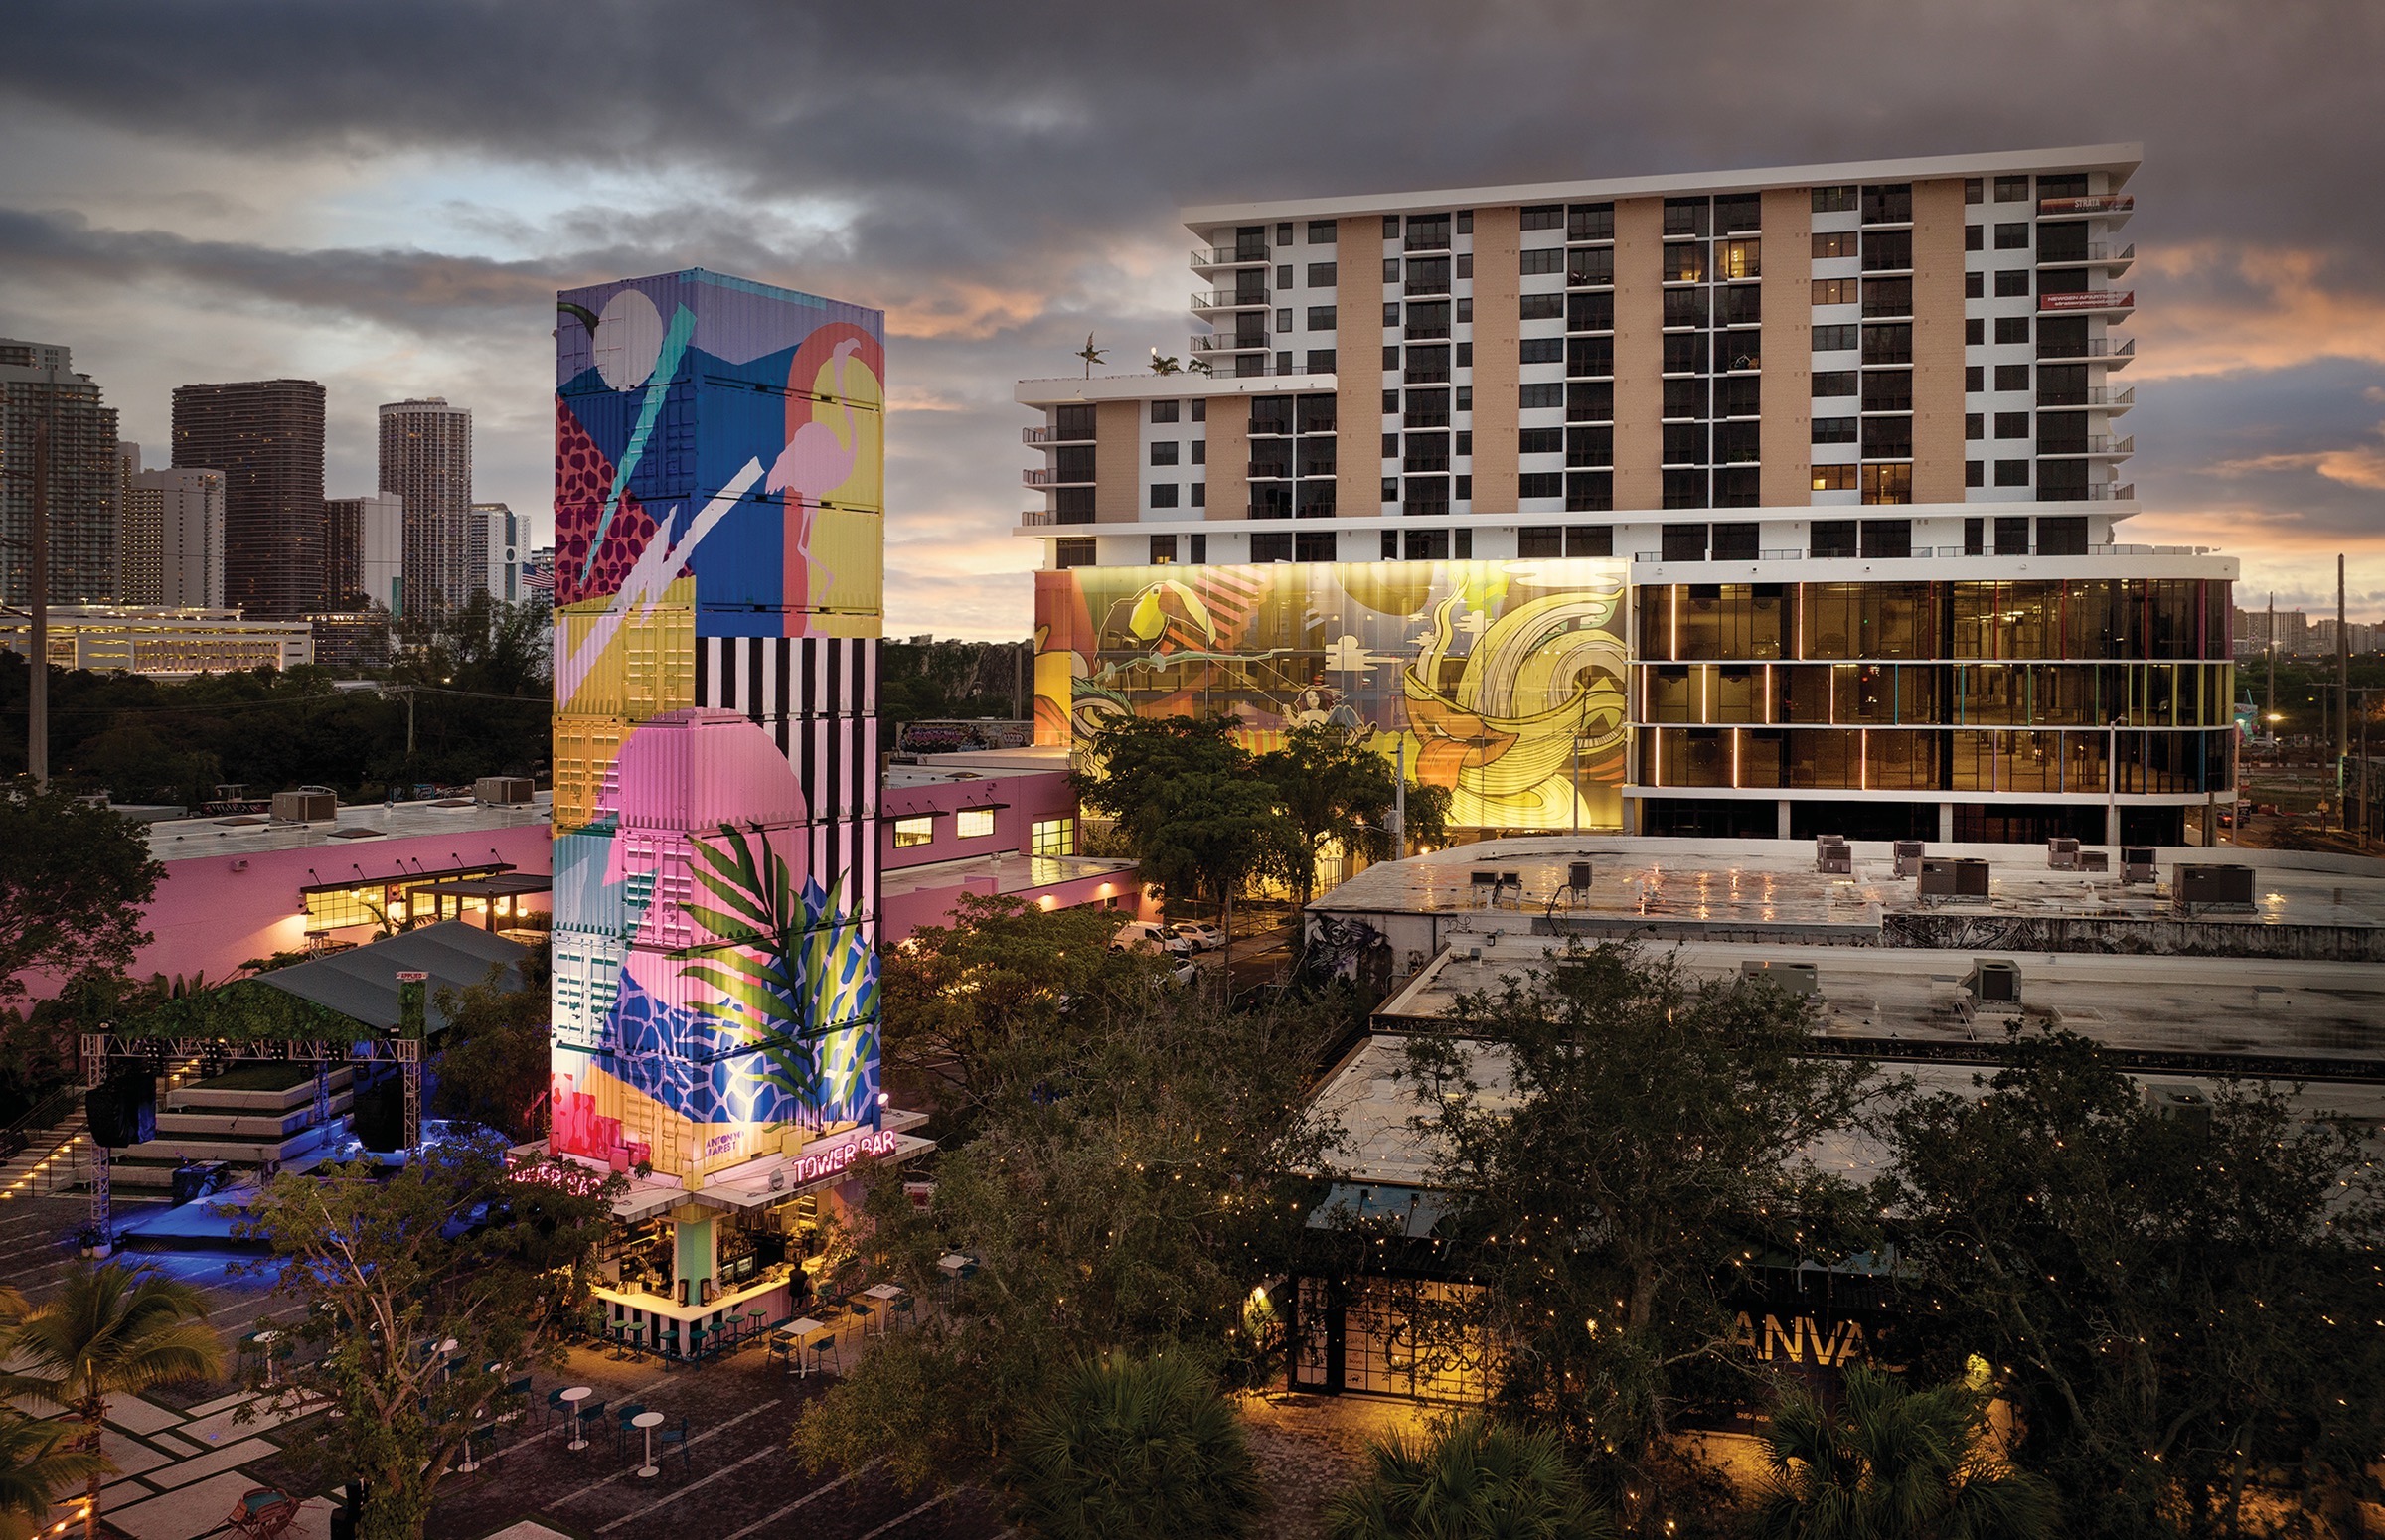 Strata Wynwood, an eight-story, mixed-use structure